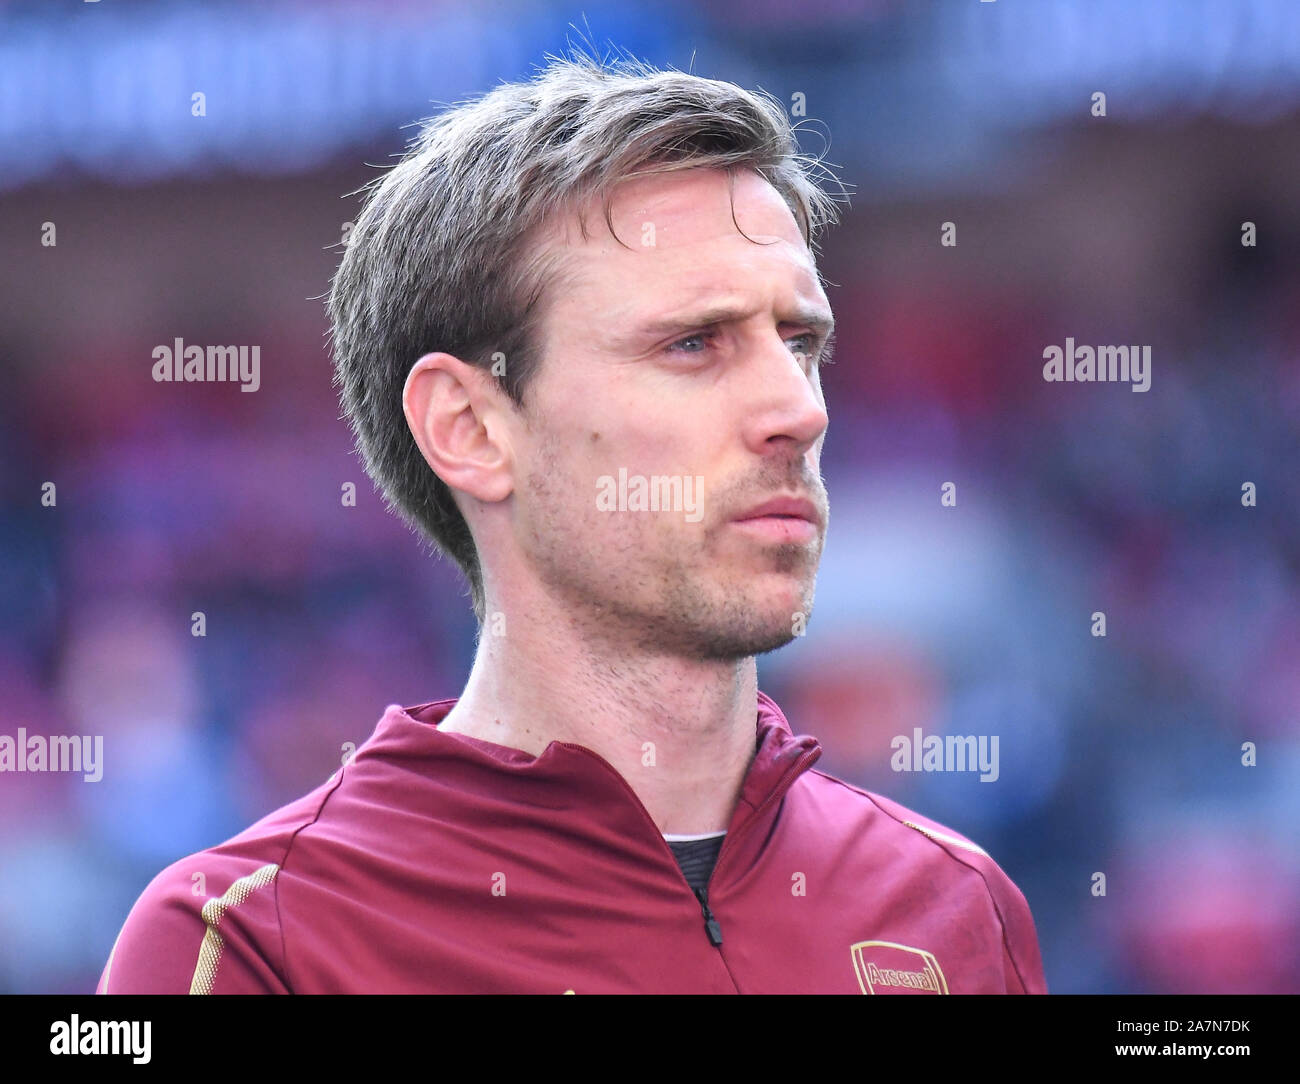 LONDON, ENGLAND - MARCH 2, 2019: Nacho Monreal of Arsenal pictured ahead of the 2018/19 Premier League game between Tottenham Hotspur and Arsenal FC at Wembley Stadium. Stock Photo